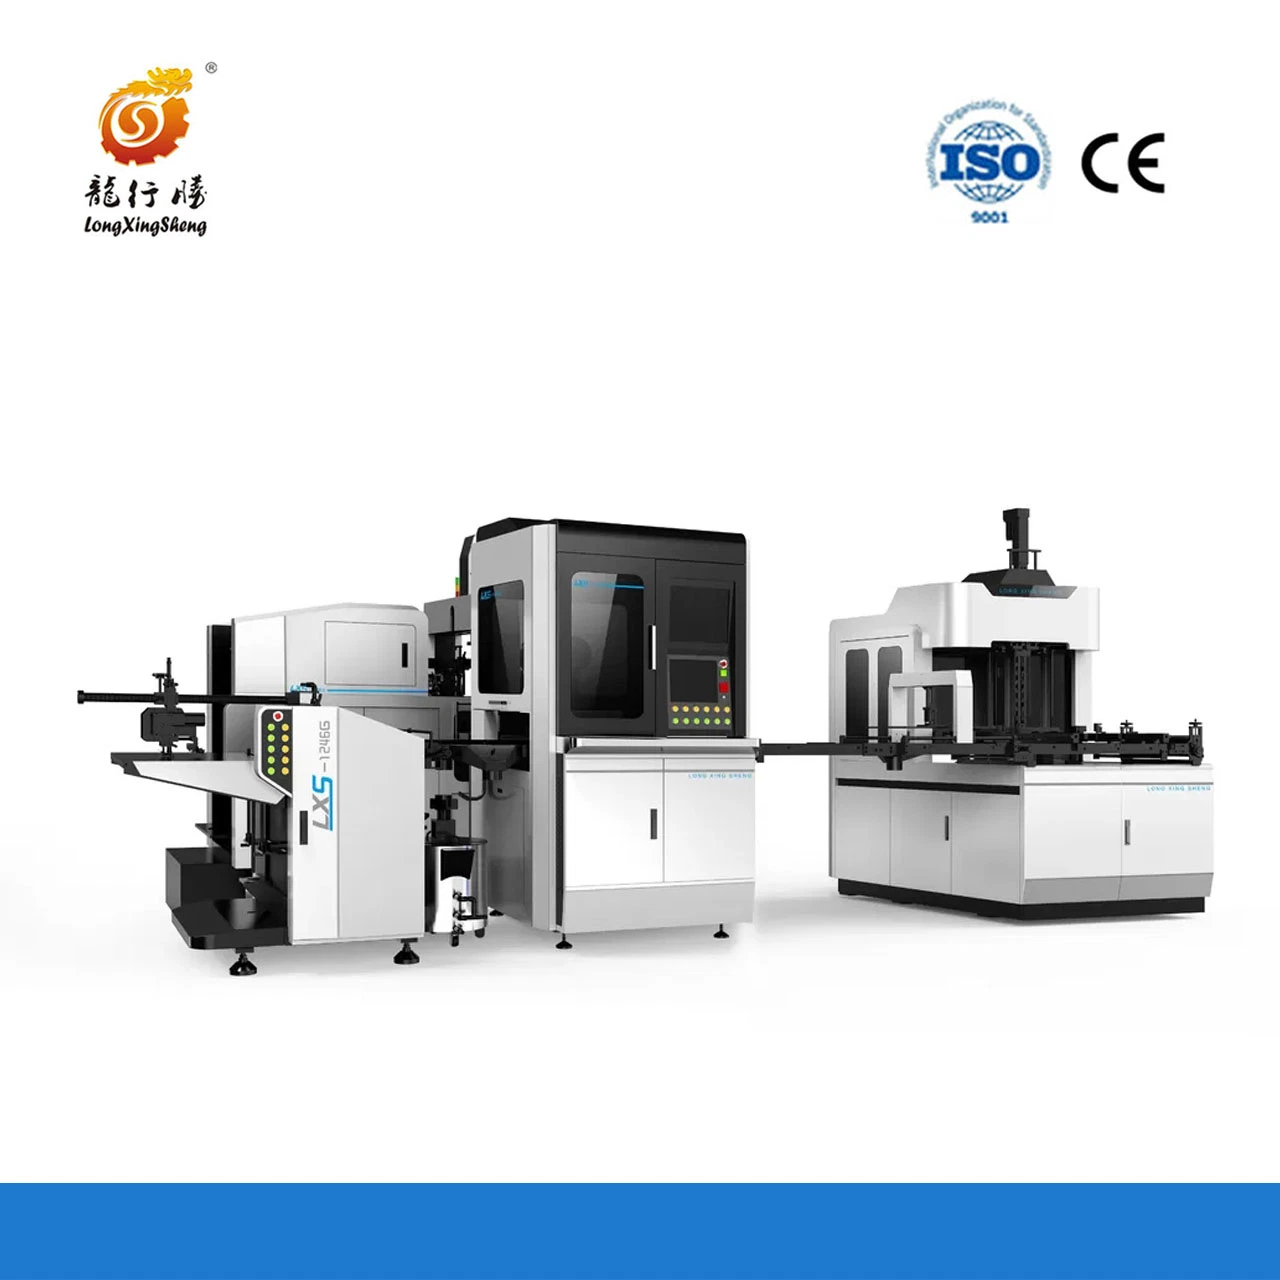 Muti-Functional, Ls-1246g Has Rigid Box Making Function, Hardcover Positioning Function. Can Connect with Four Sides Wrapping Machine to Make Hard Cover.